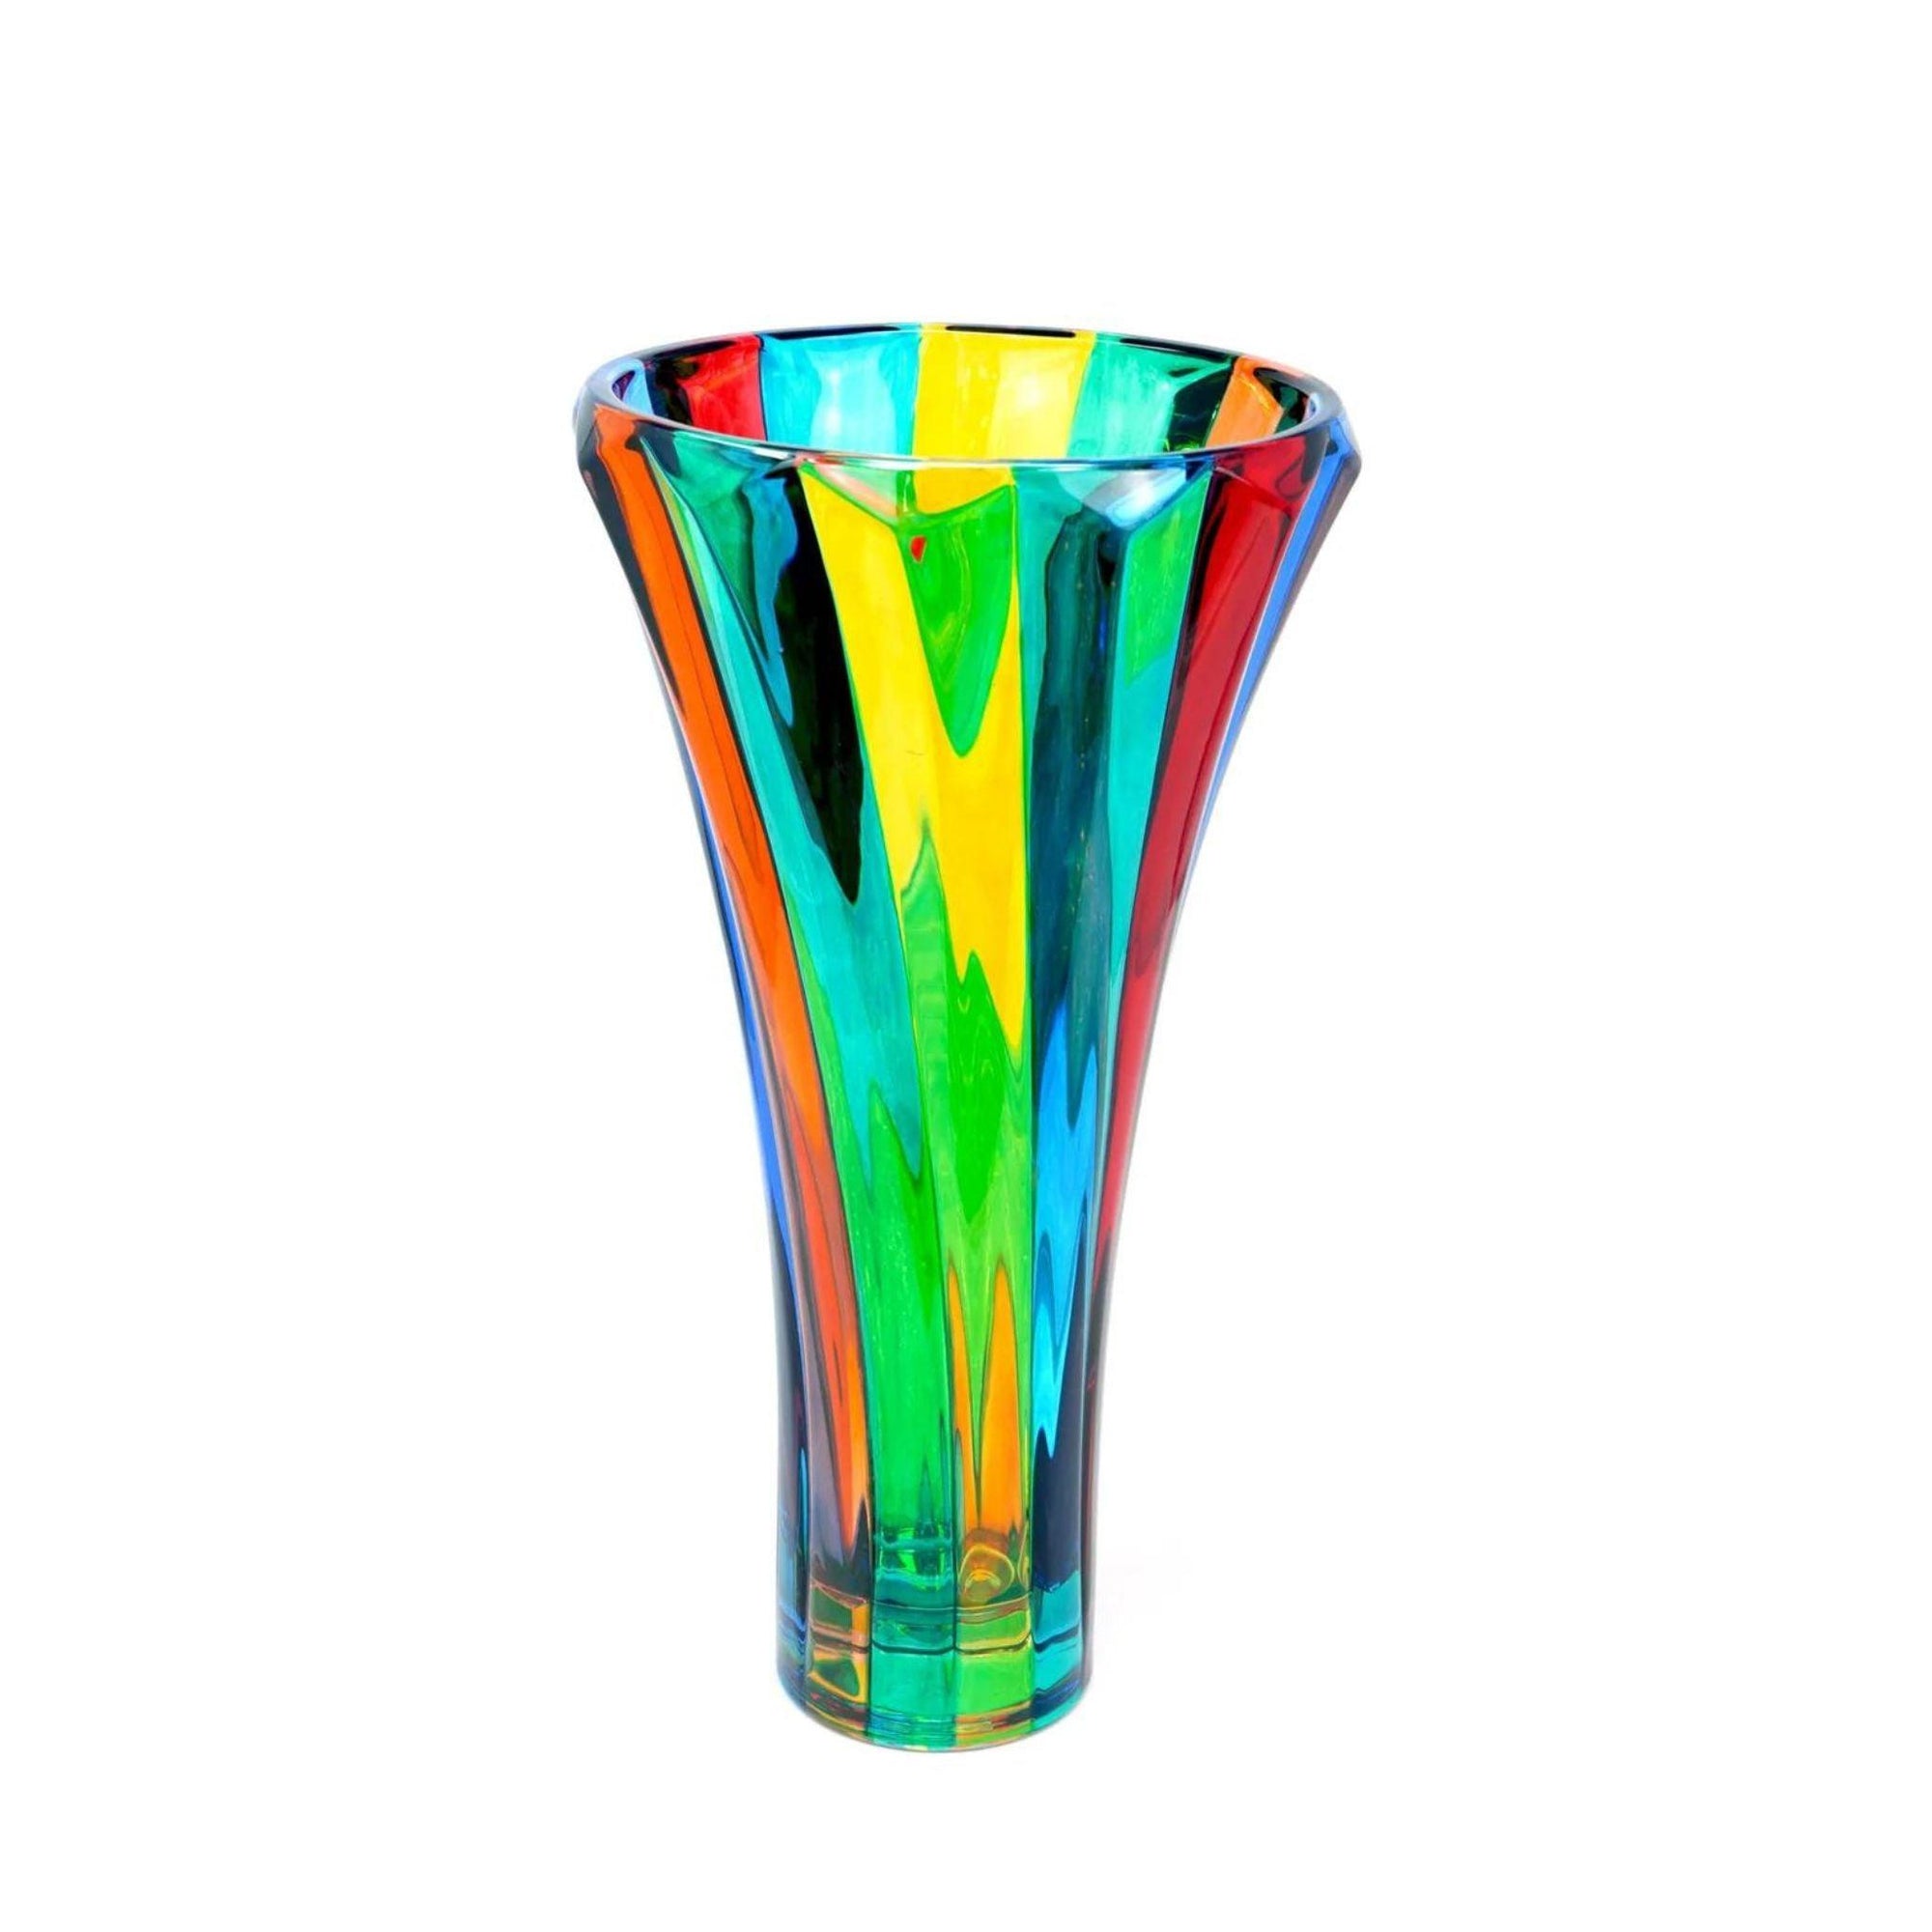 Piccadelli Luxury Vase, Hand Painted Crystal, Made In Italy at MyItalianDecor